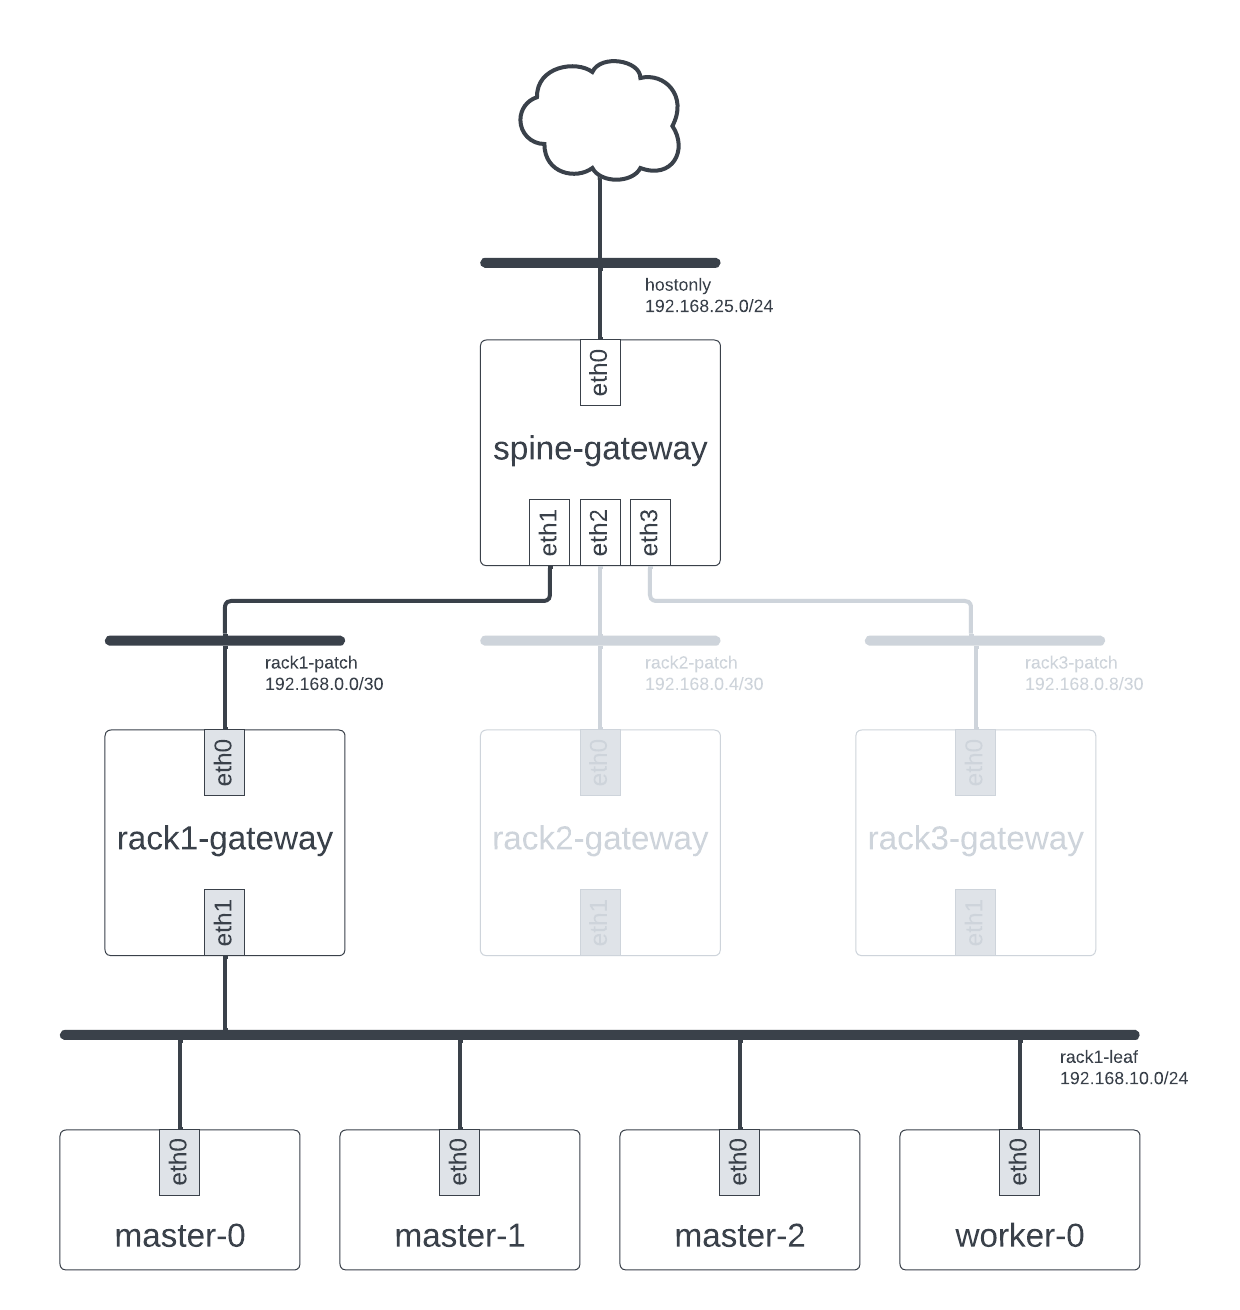 Image displaying the network topology of VMs in a deployment